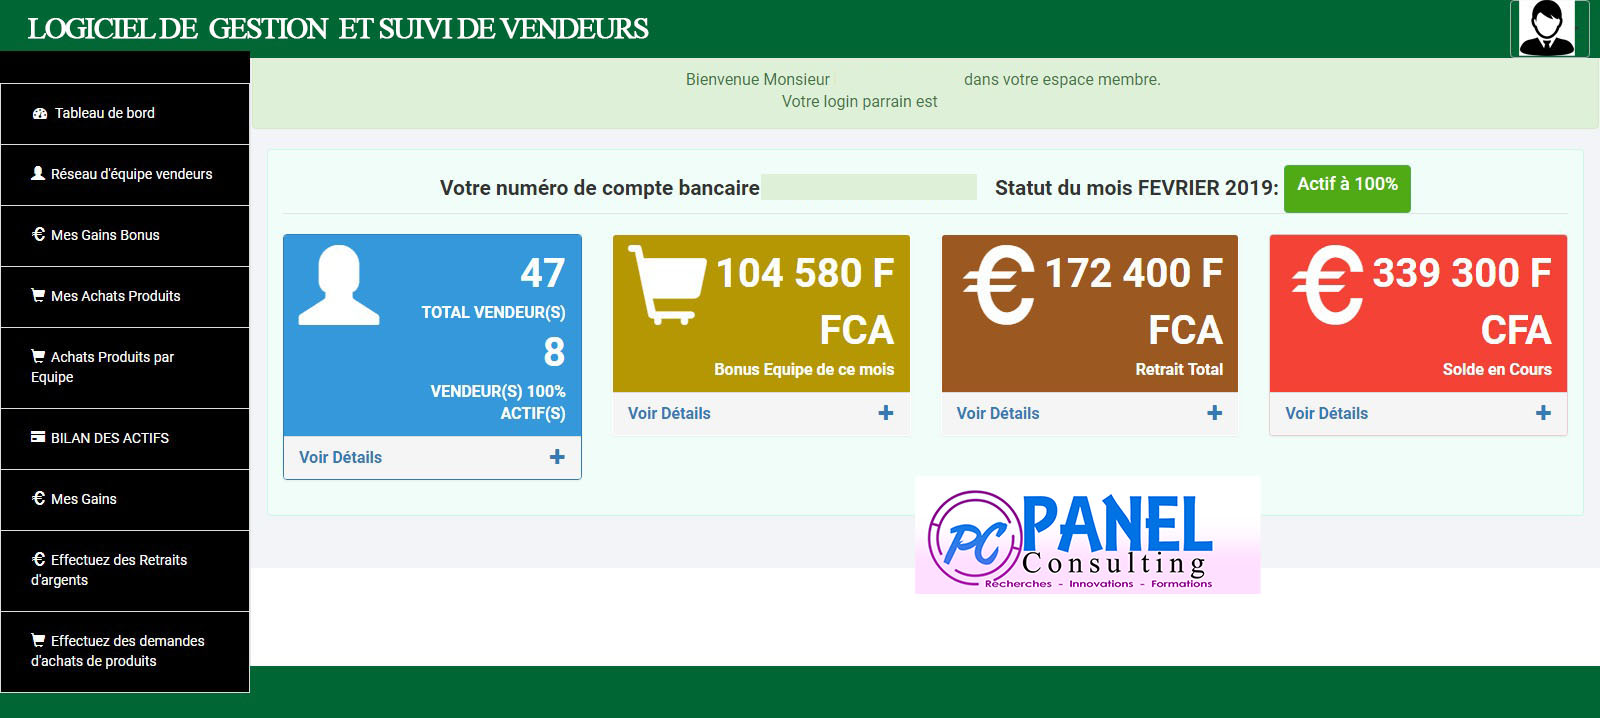 tableau-bord-application-web-gestion-vente-panel-consulting.jpg - panel consulting